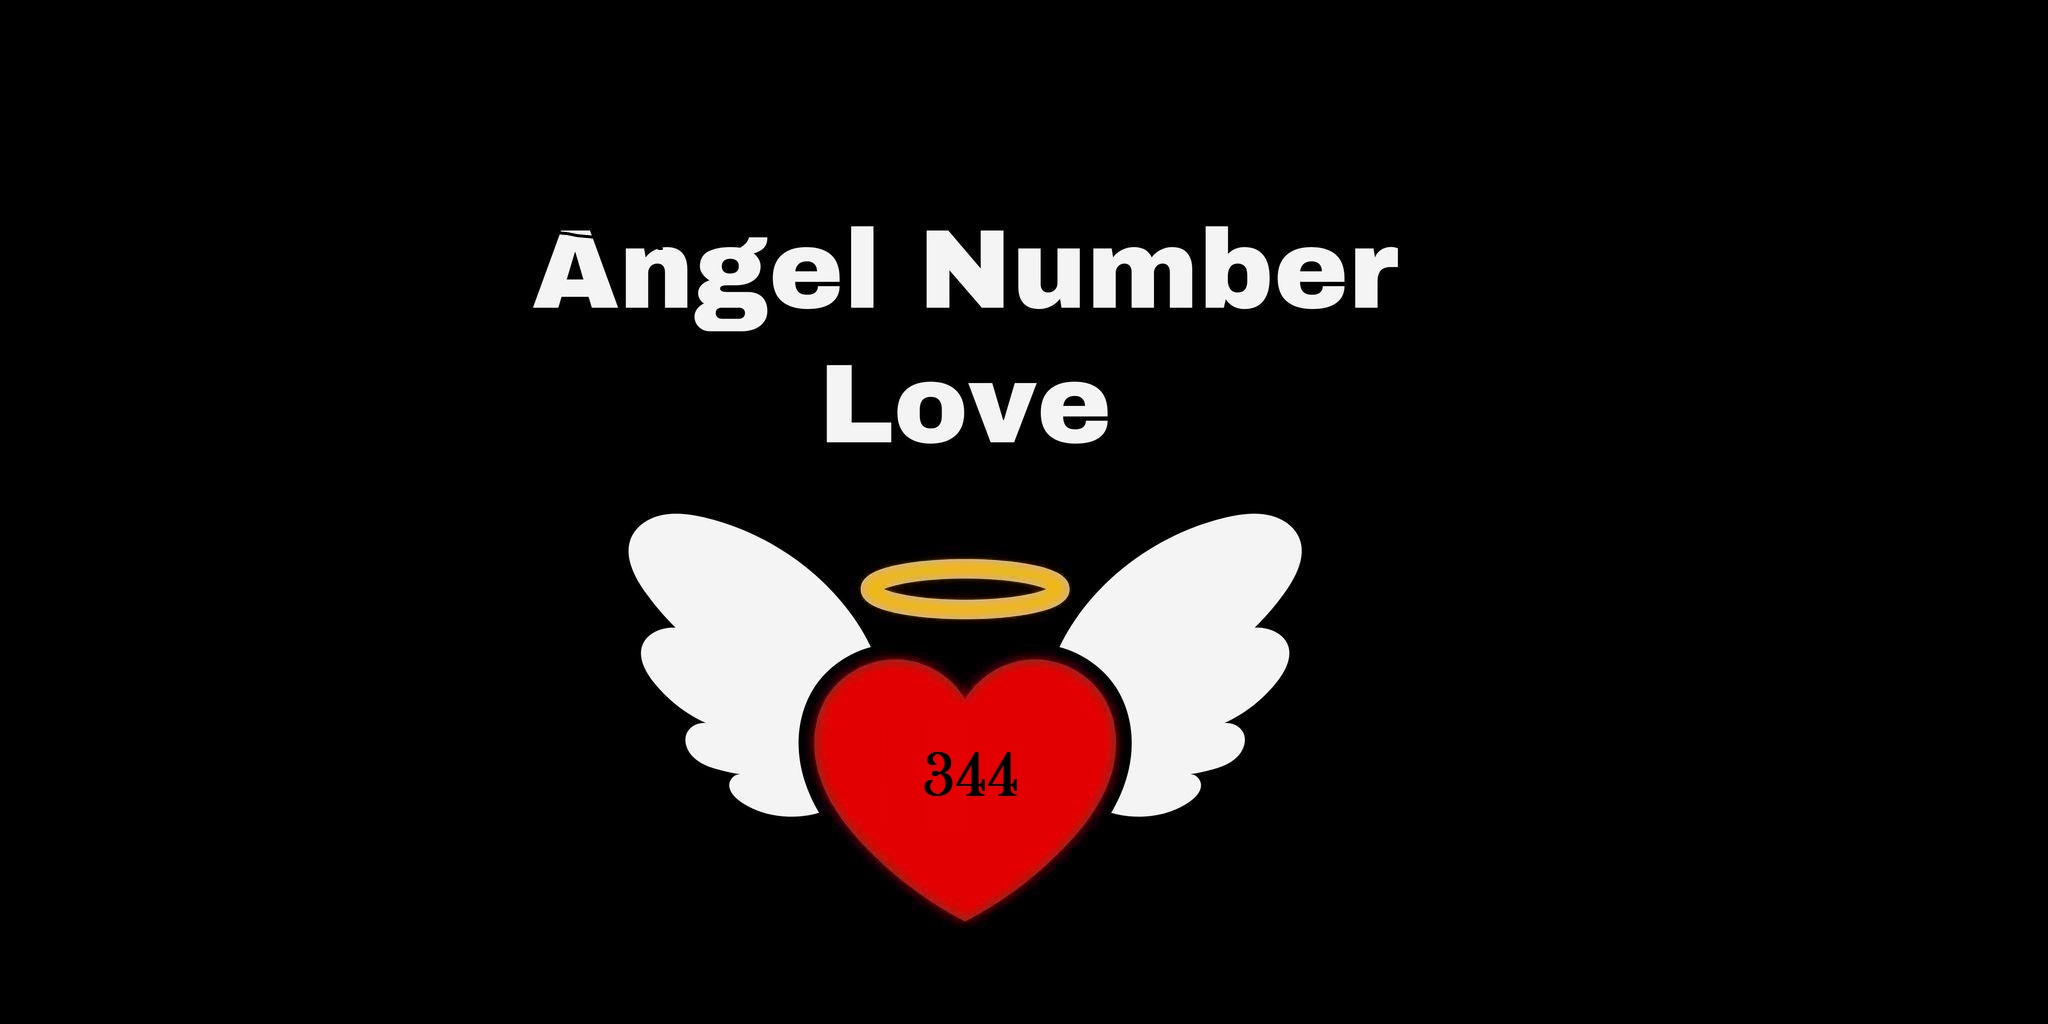 344 Angel Number Meaning In Love & Relationship